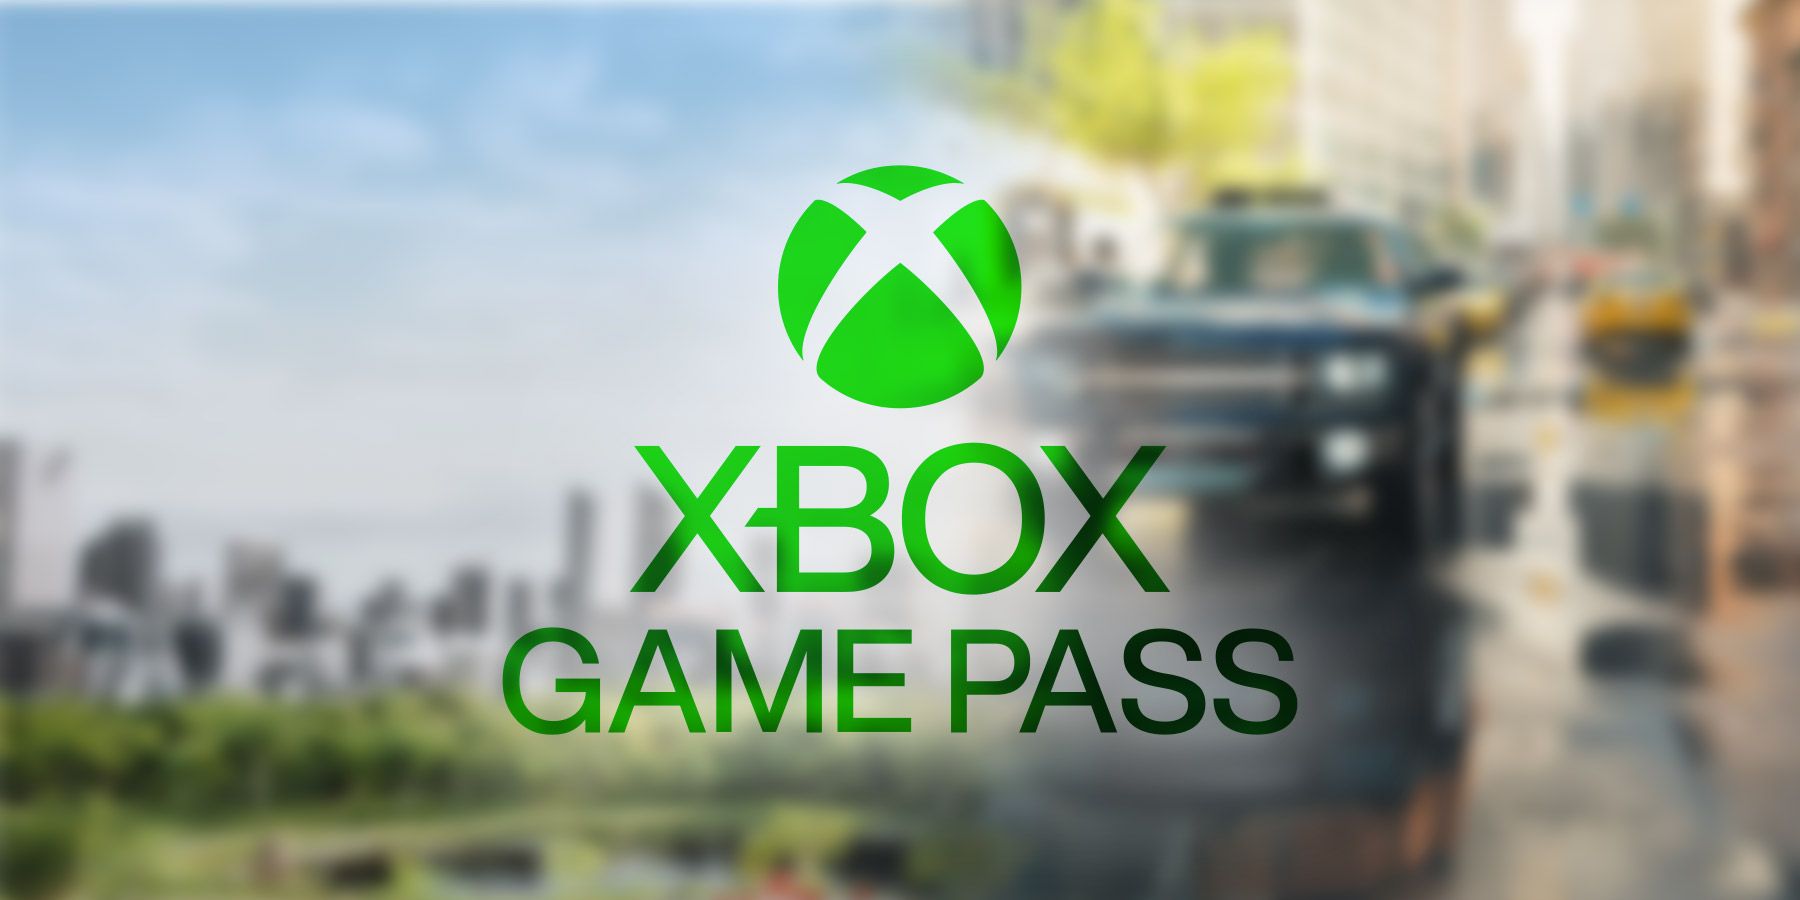 Xbox Game Pass October 2023 Wave 2 Games Include Cities: Skylines 2